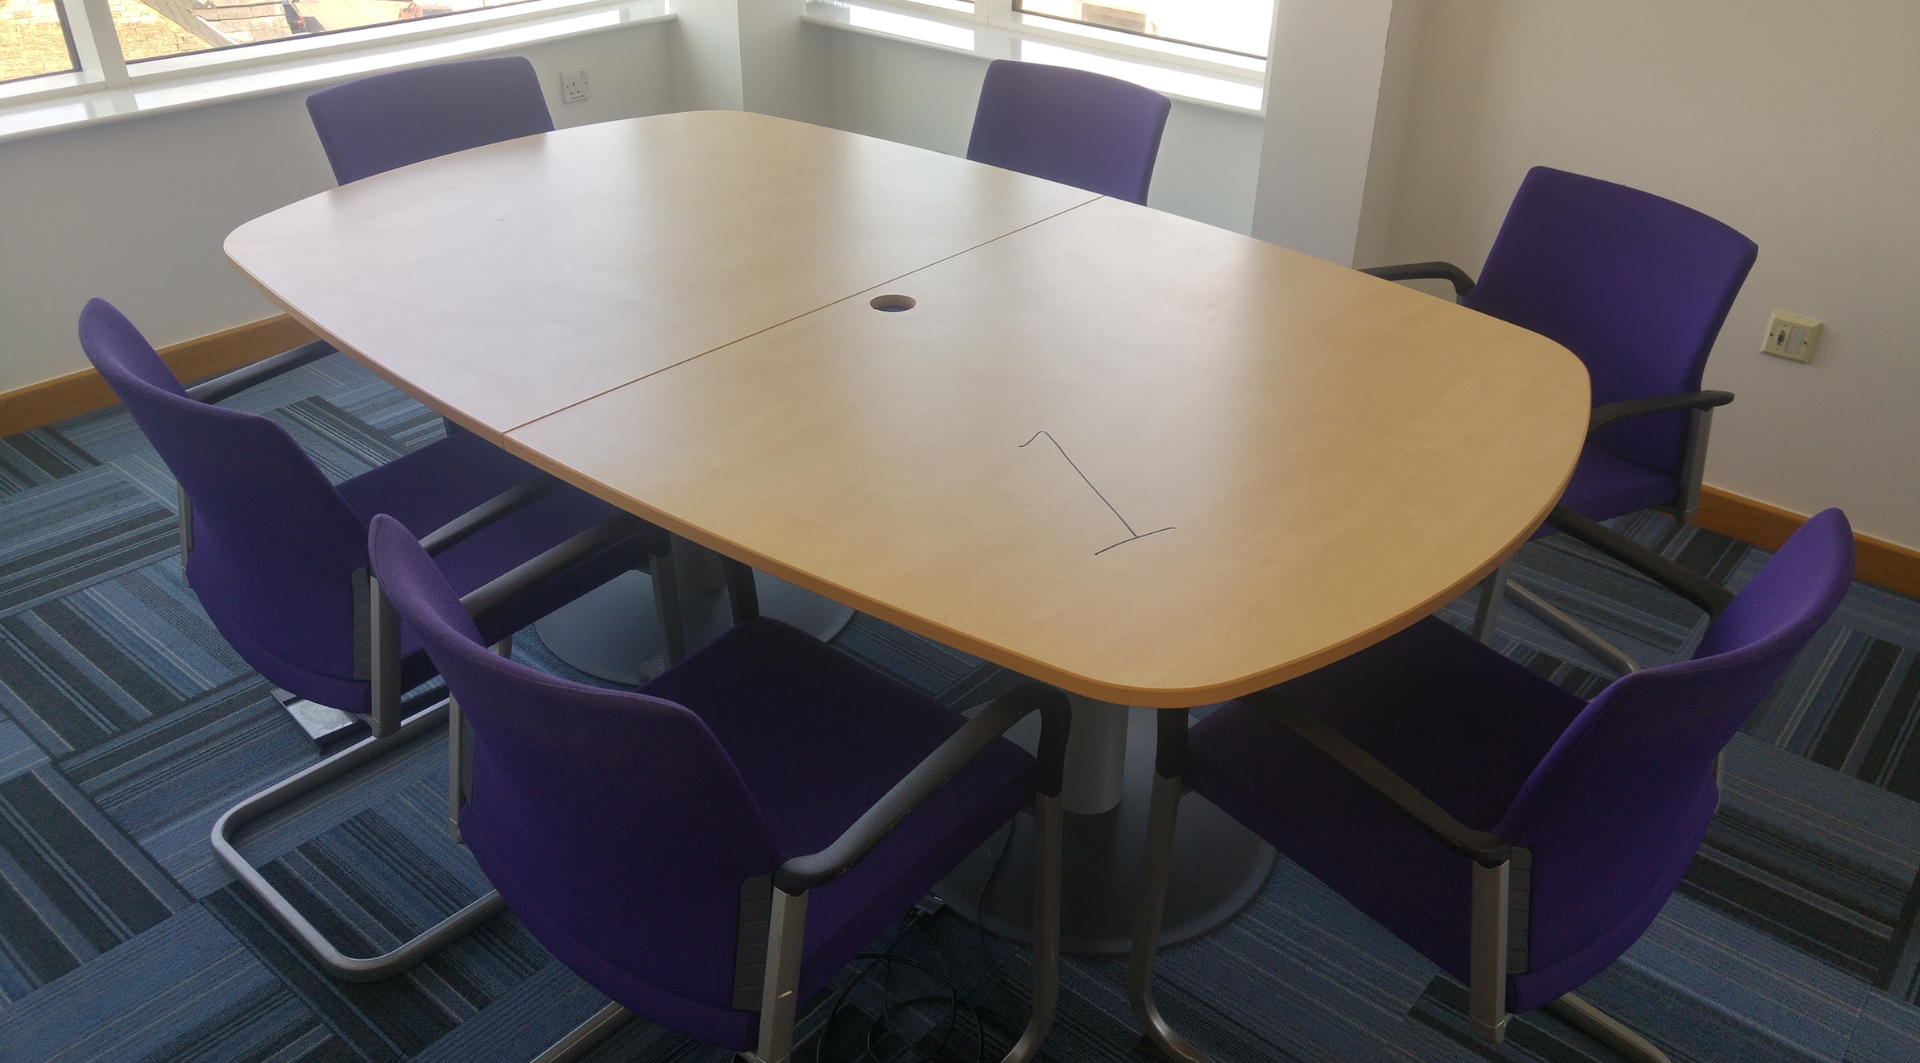 1 x Conference Table with Round Ends + 6 Chairs